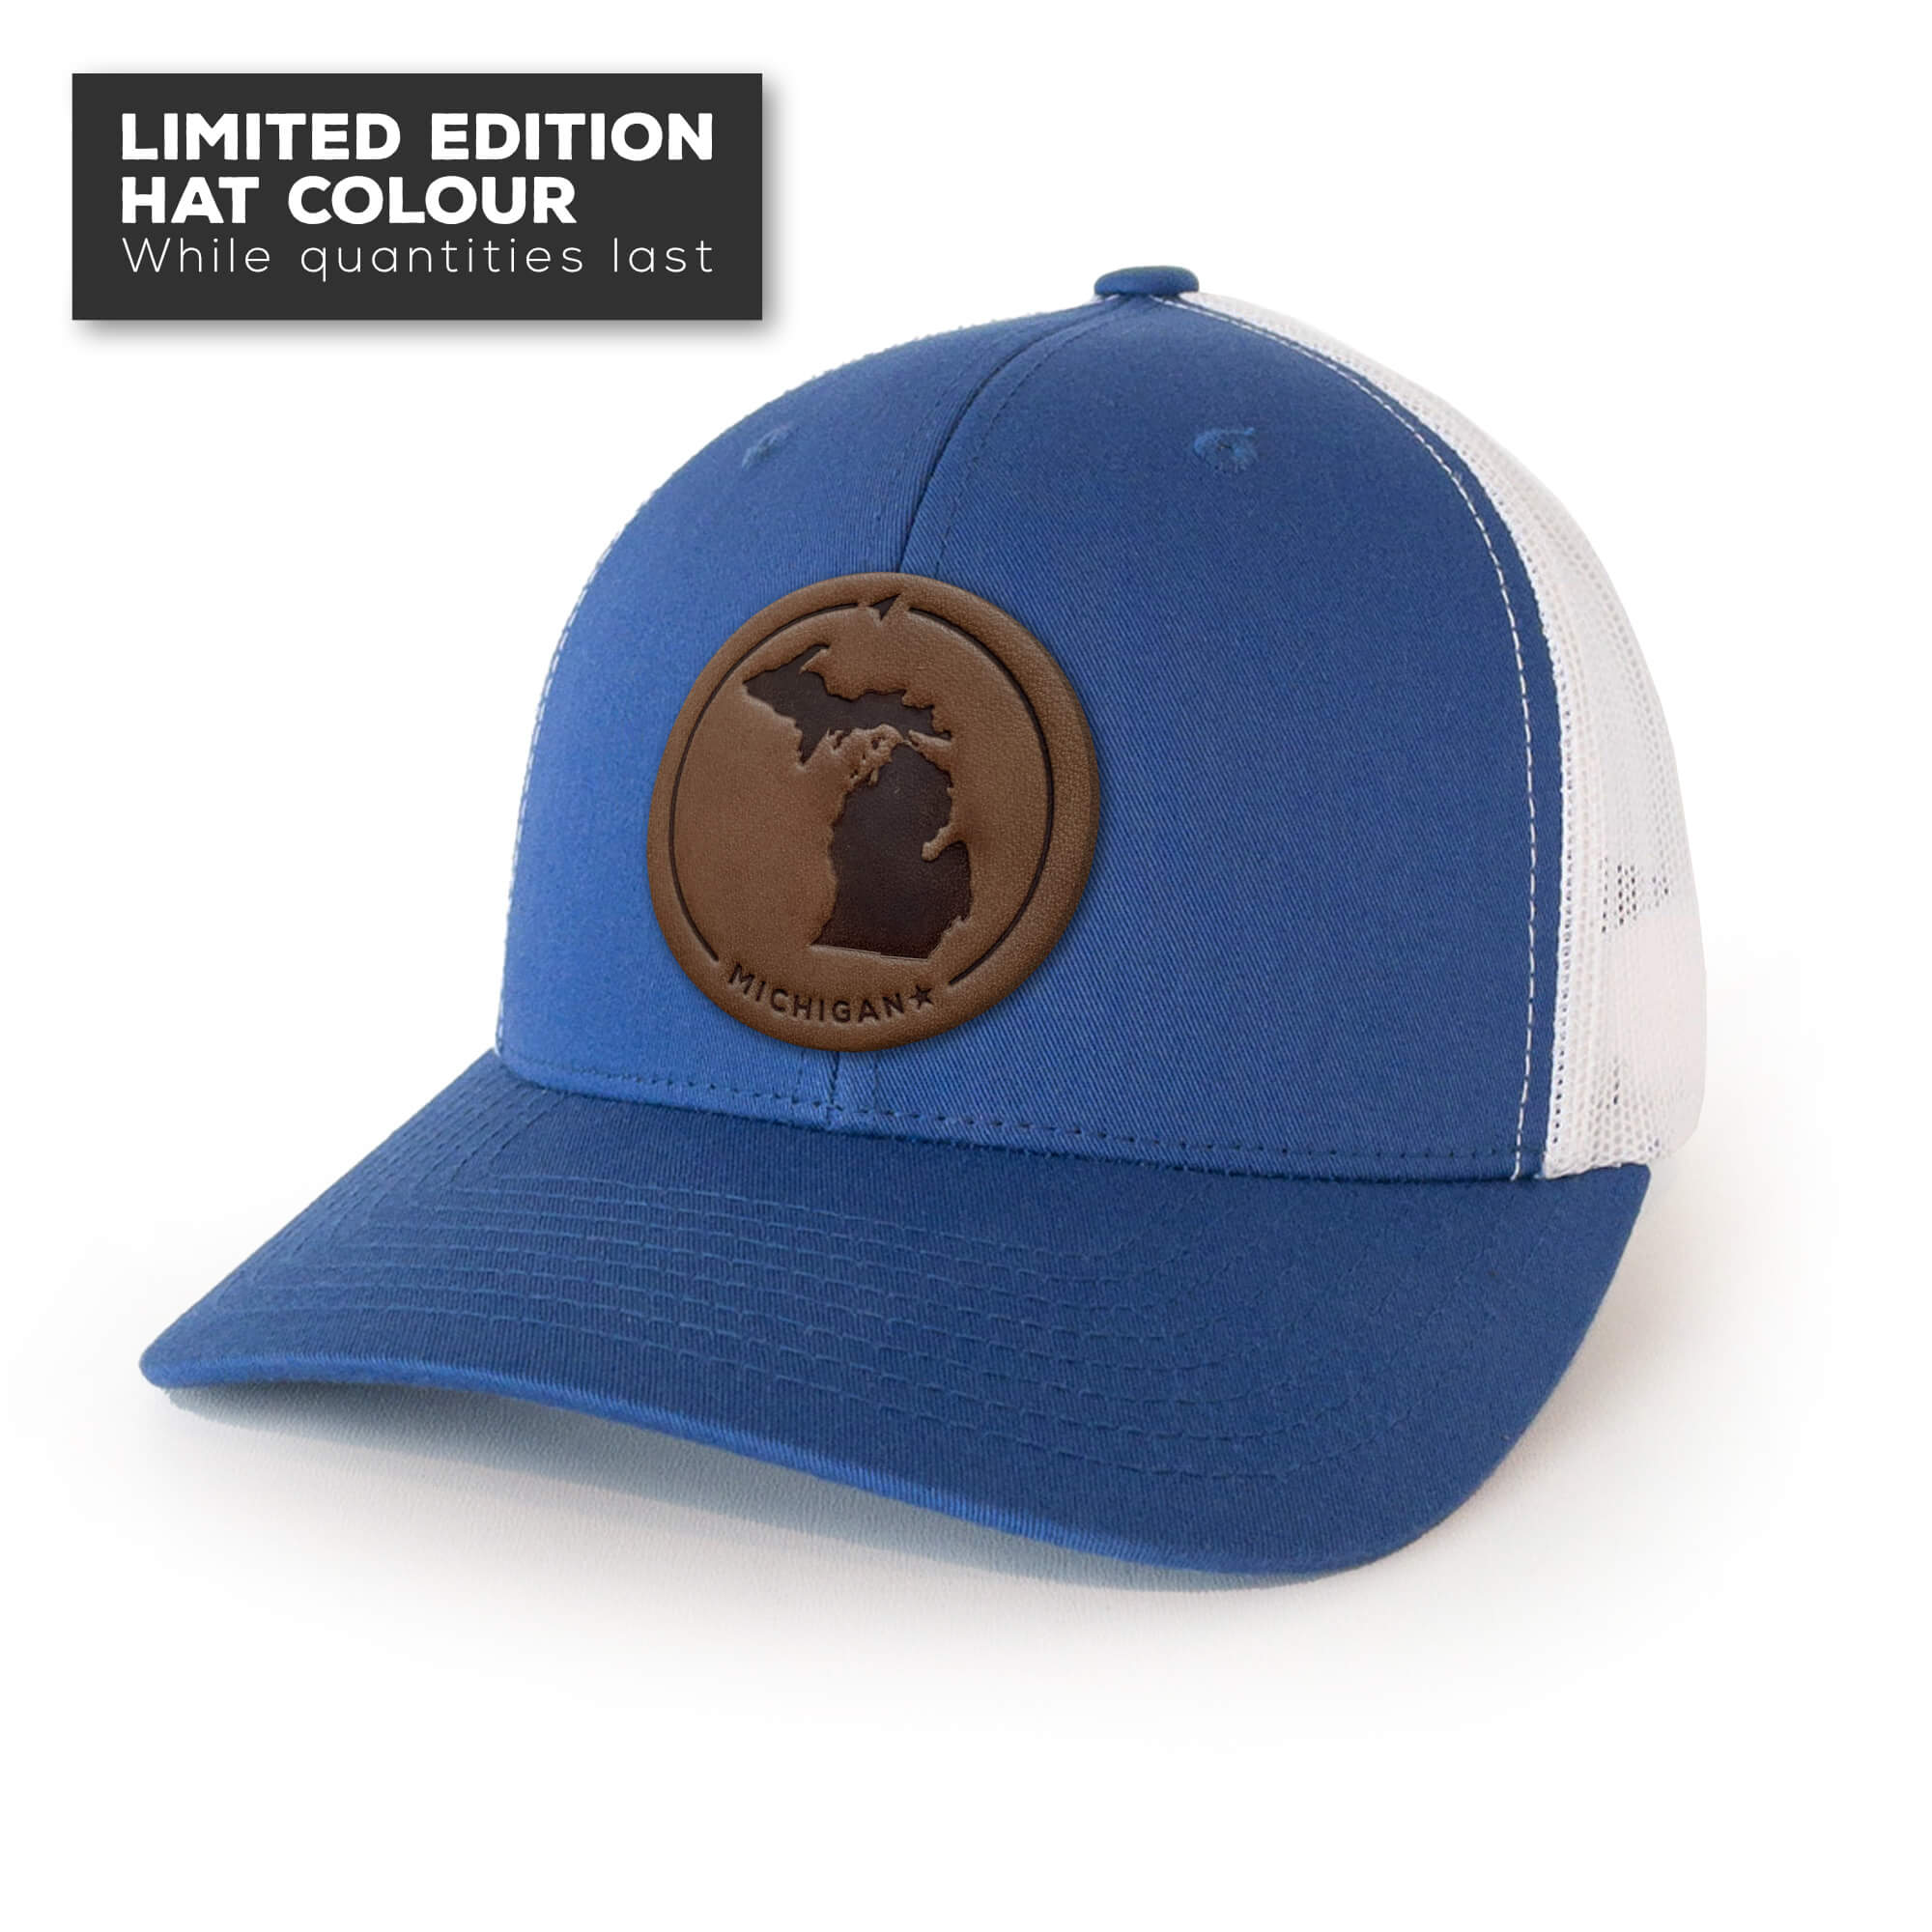 Royal Blue trucker hat with full-grain leather patch of Michigan